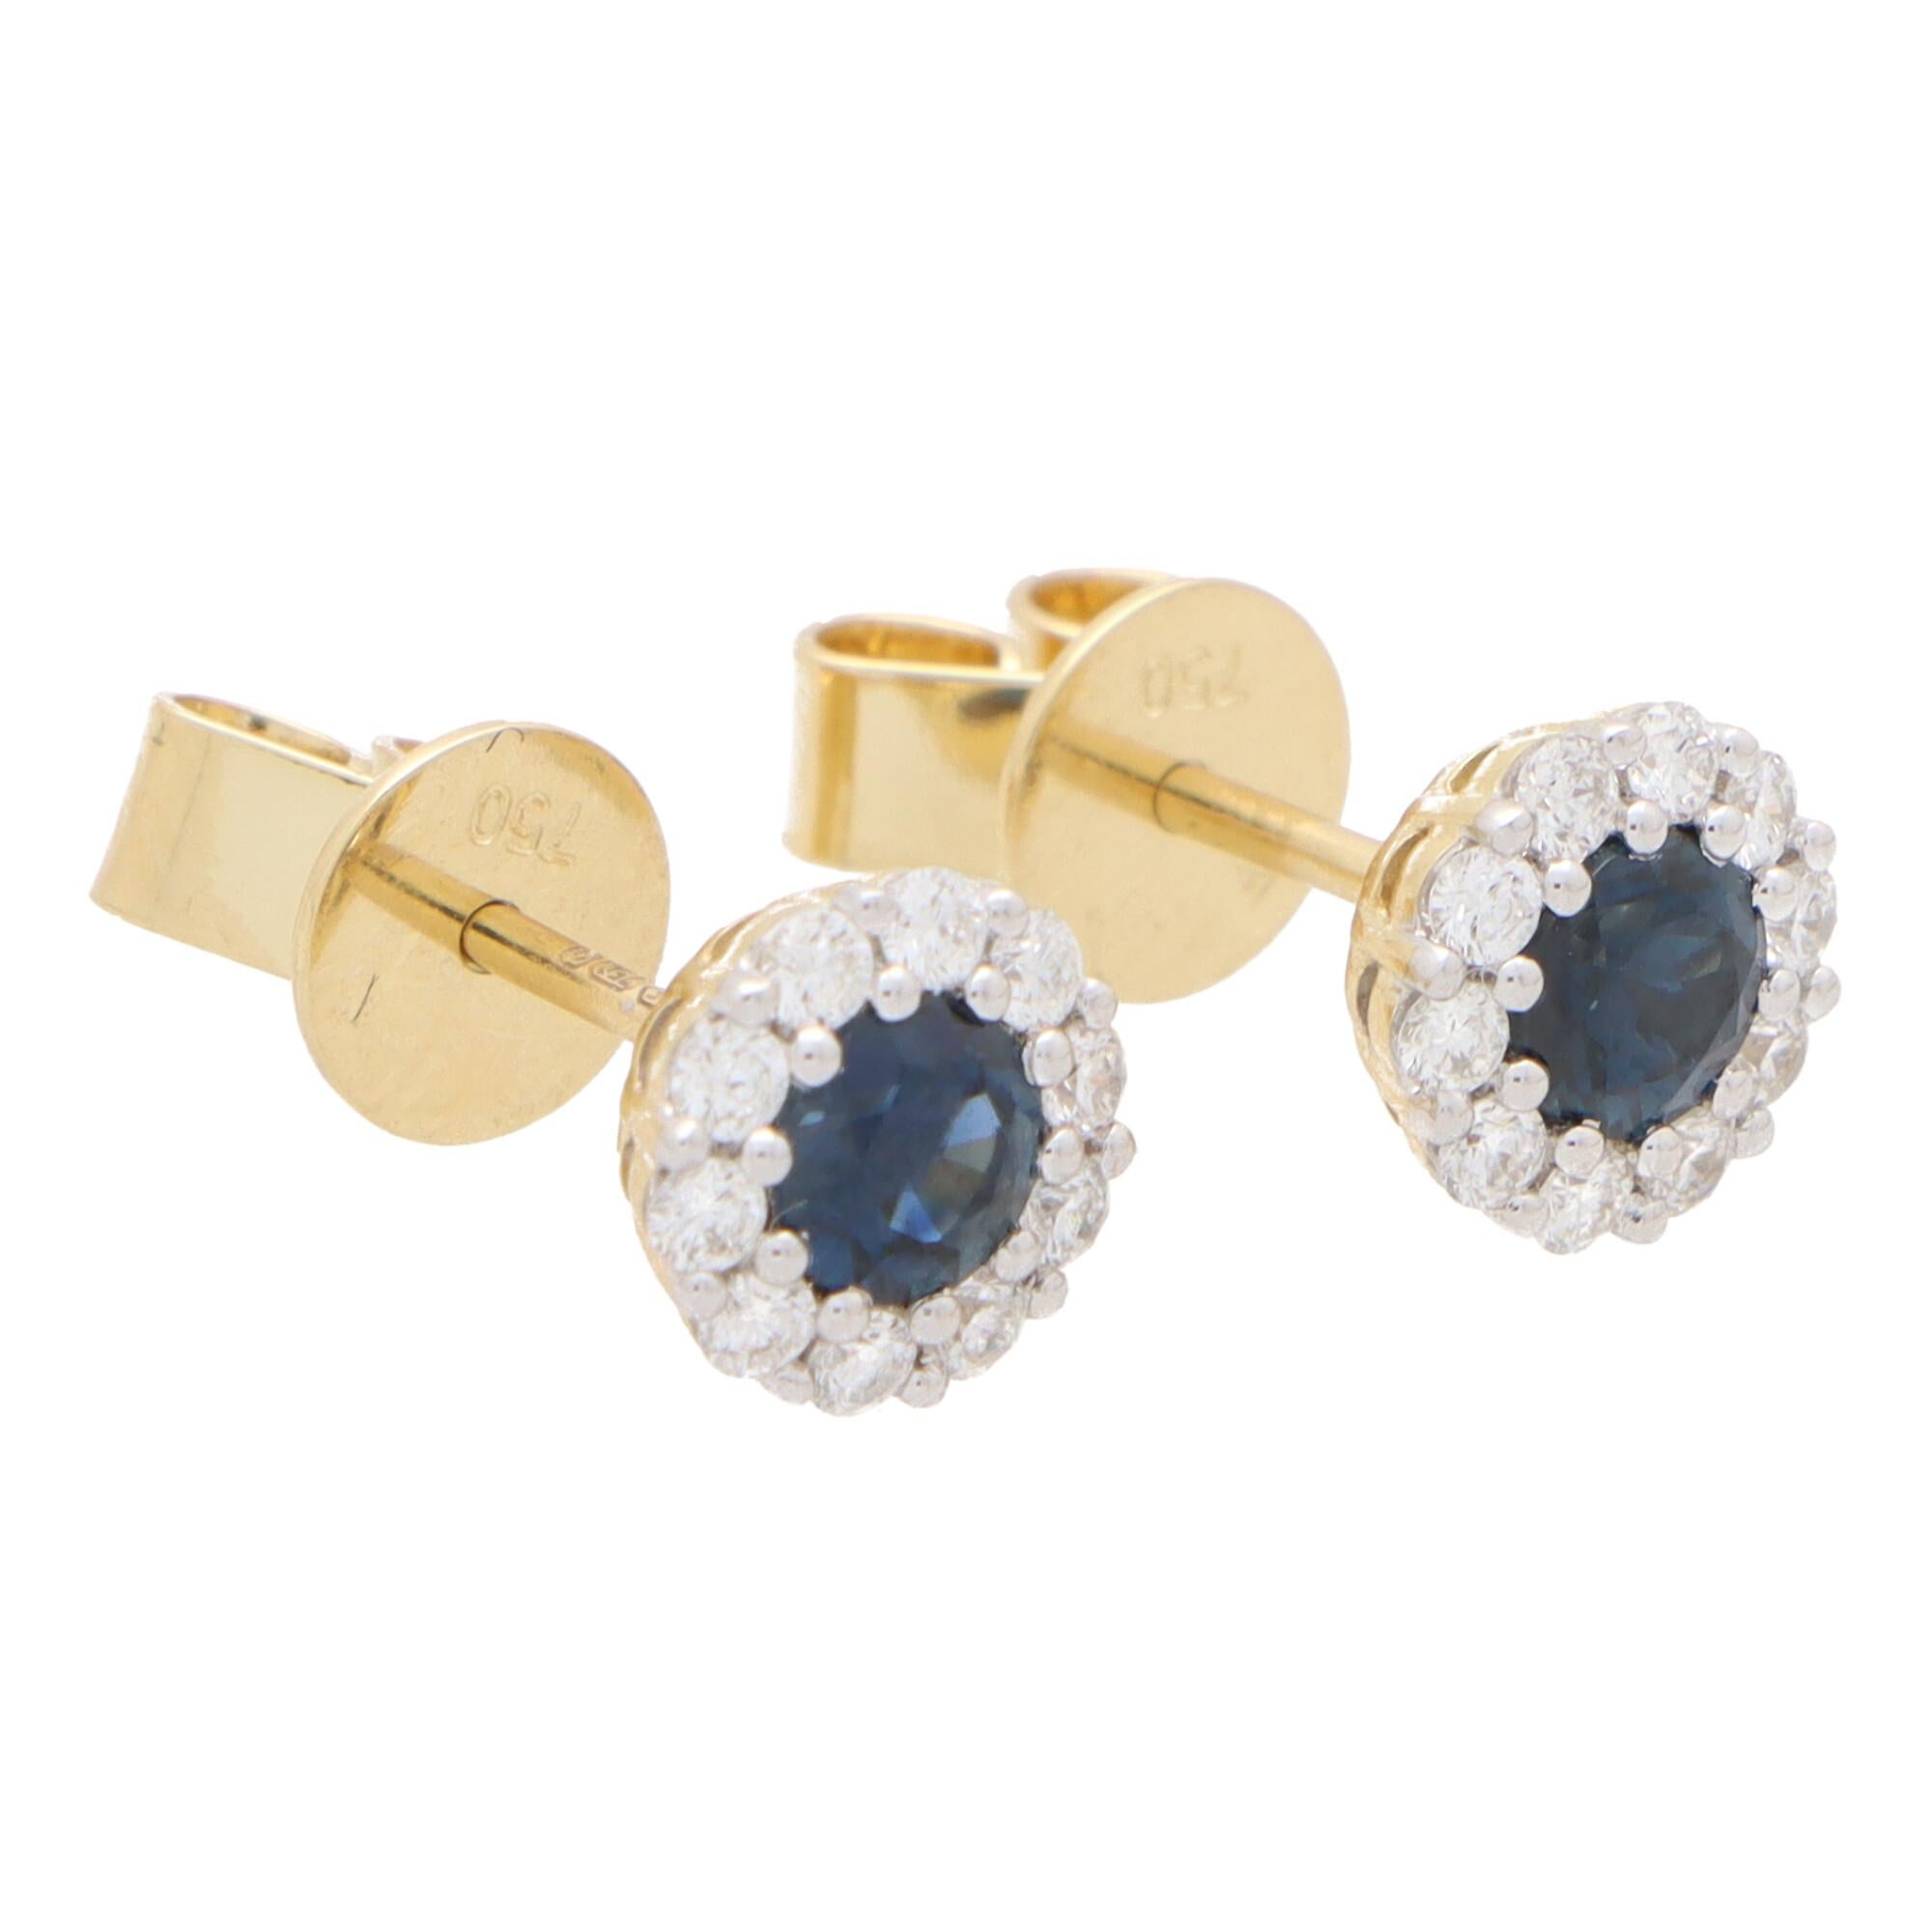 A beautiful pair of sapphire and diamond circular cluster earrings set in 18k yellow gold.

Each earring centrally features a beautiful royal blue coloured round cut sapphire surrounded by a halo of 10 round brilliant-cut diamonds. All of the stones